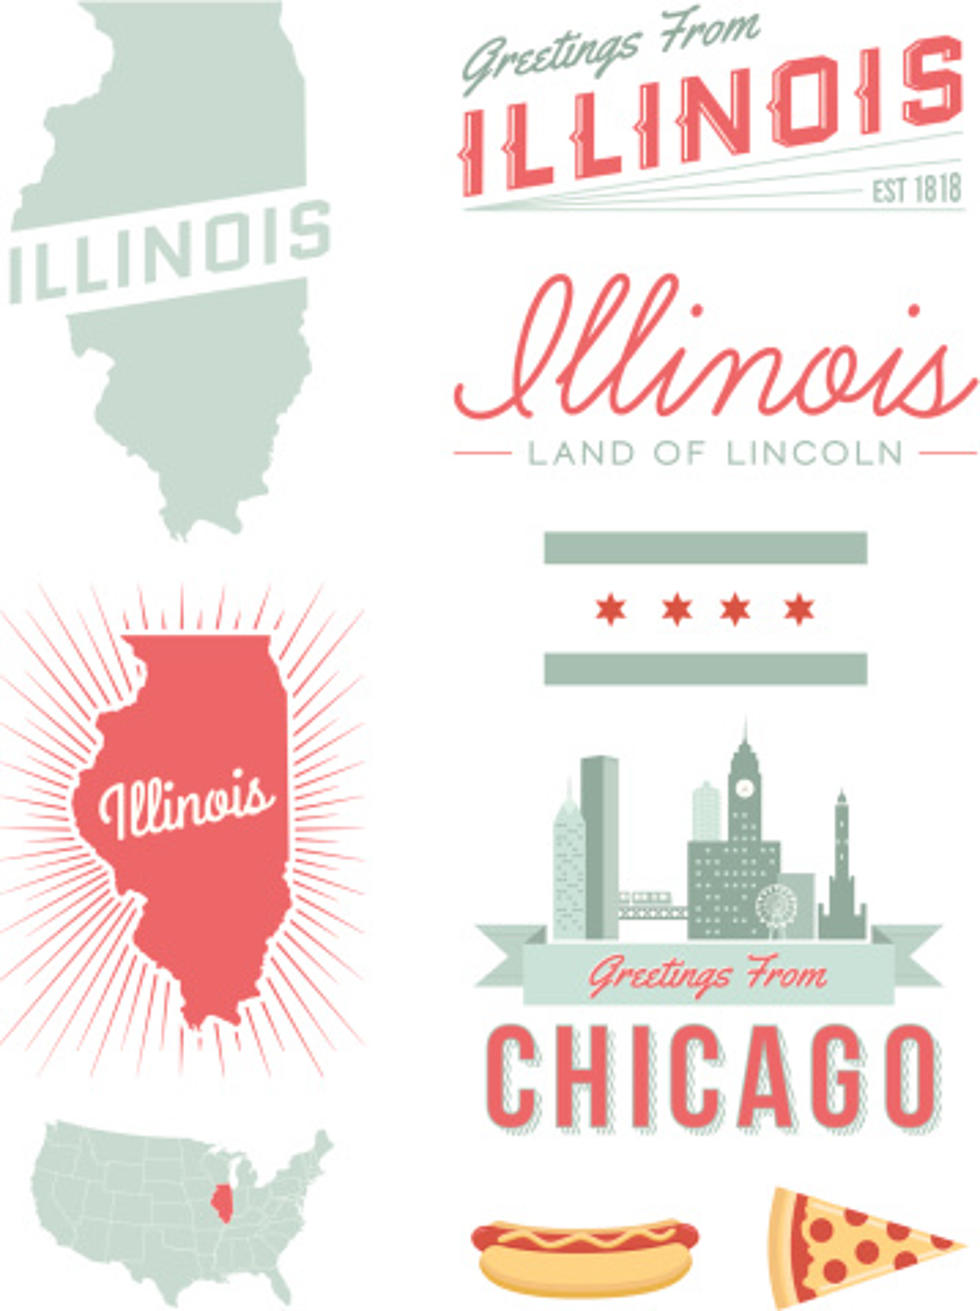 Think You Know Illinois? Take the Quiz